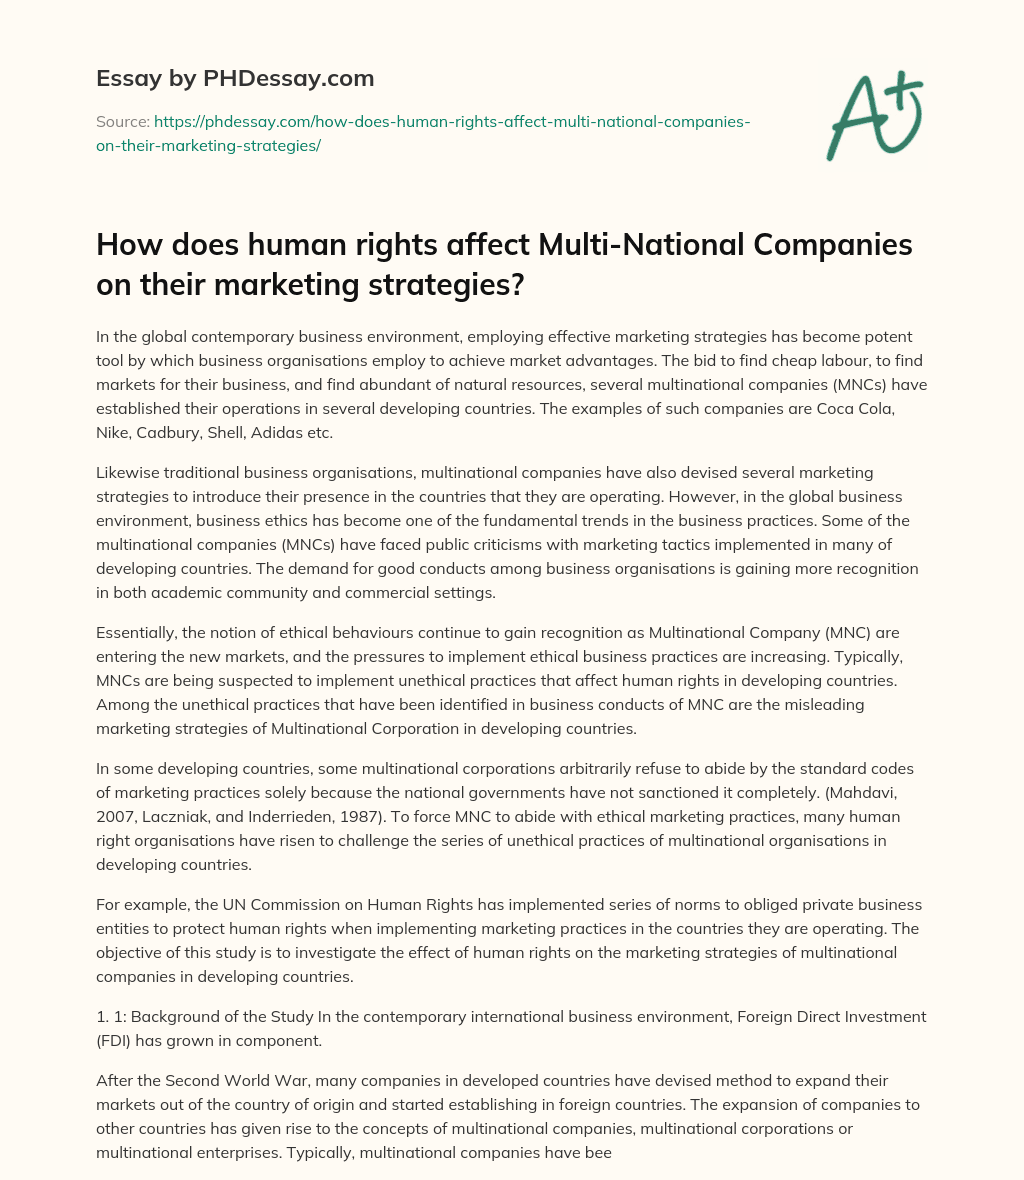 How does human rights affect Multi-National Companies on their marketing strategies? essay